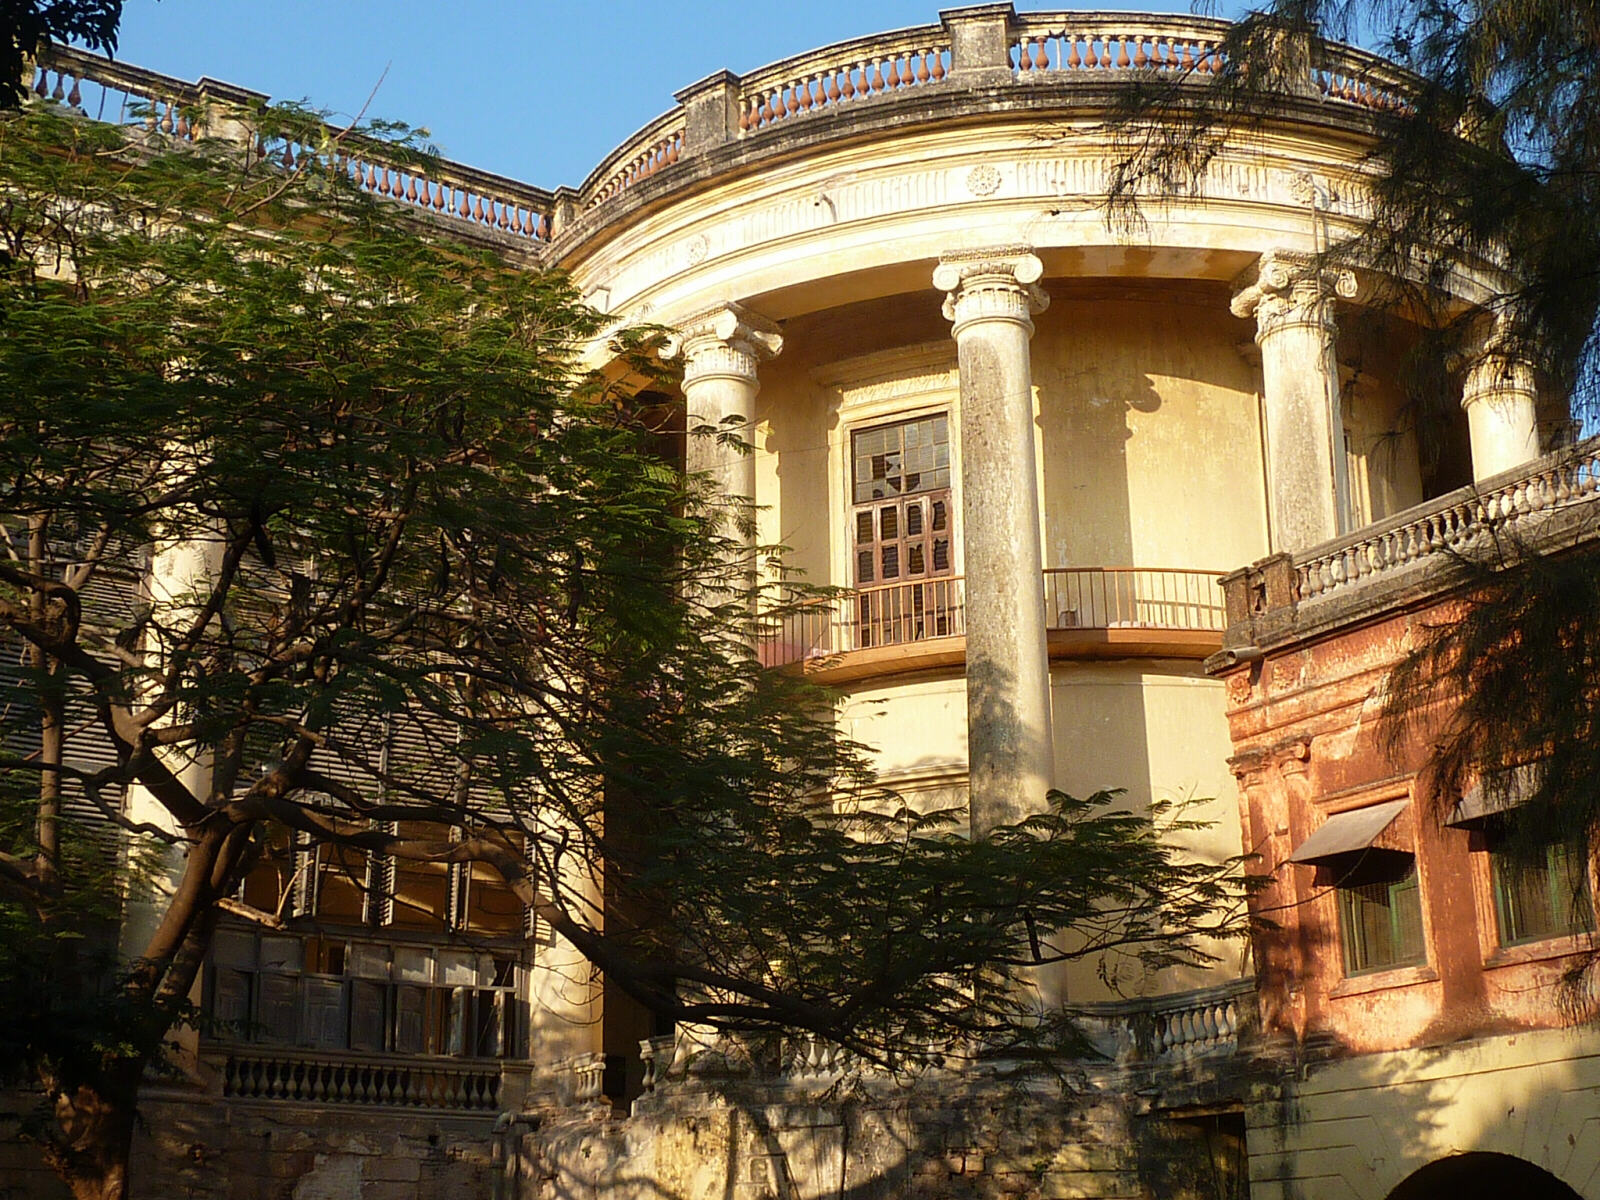 The former British Residency in Hyderabad, India